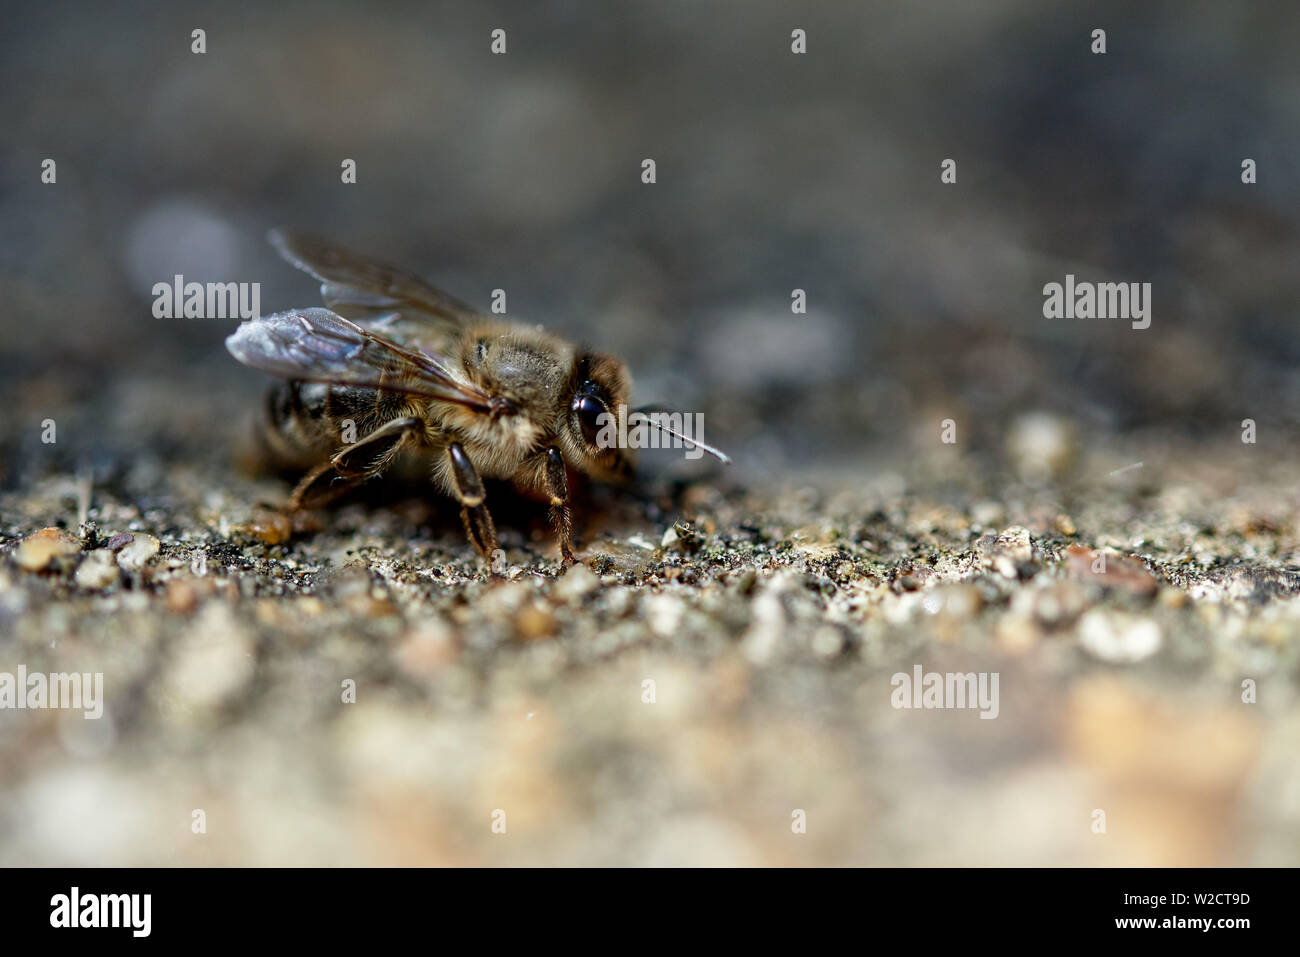 Detailed close up of a Honey Bee crawling along some gravel. Stock Photo